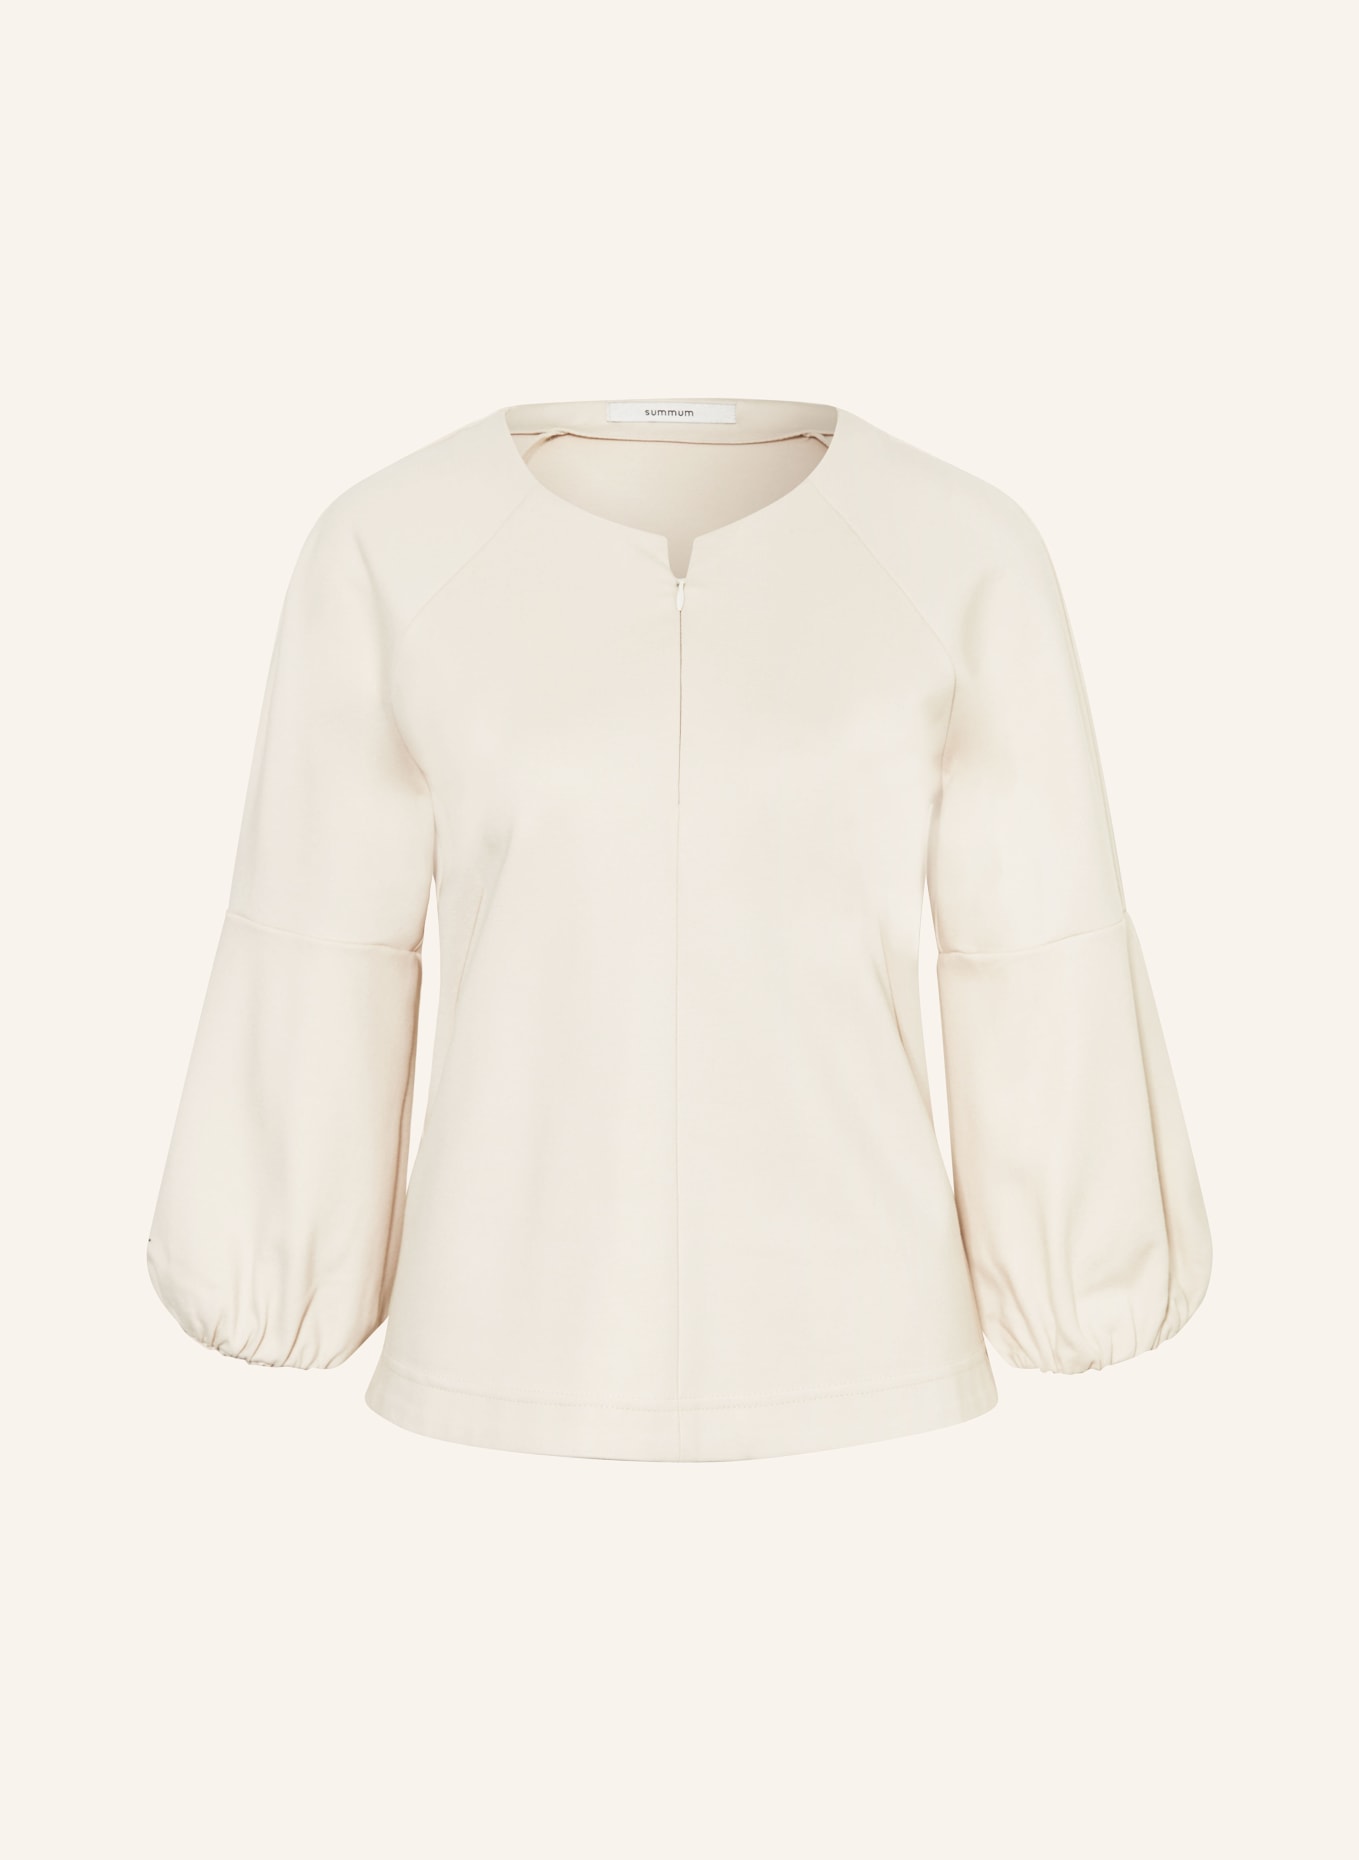 summum woman Shirt with 3/4 sleeves, Color: CREAM (Image 1)